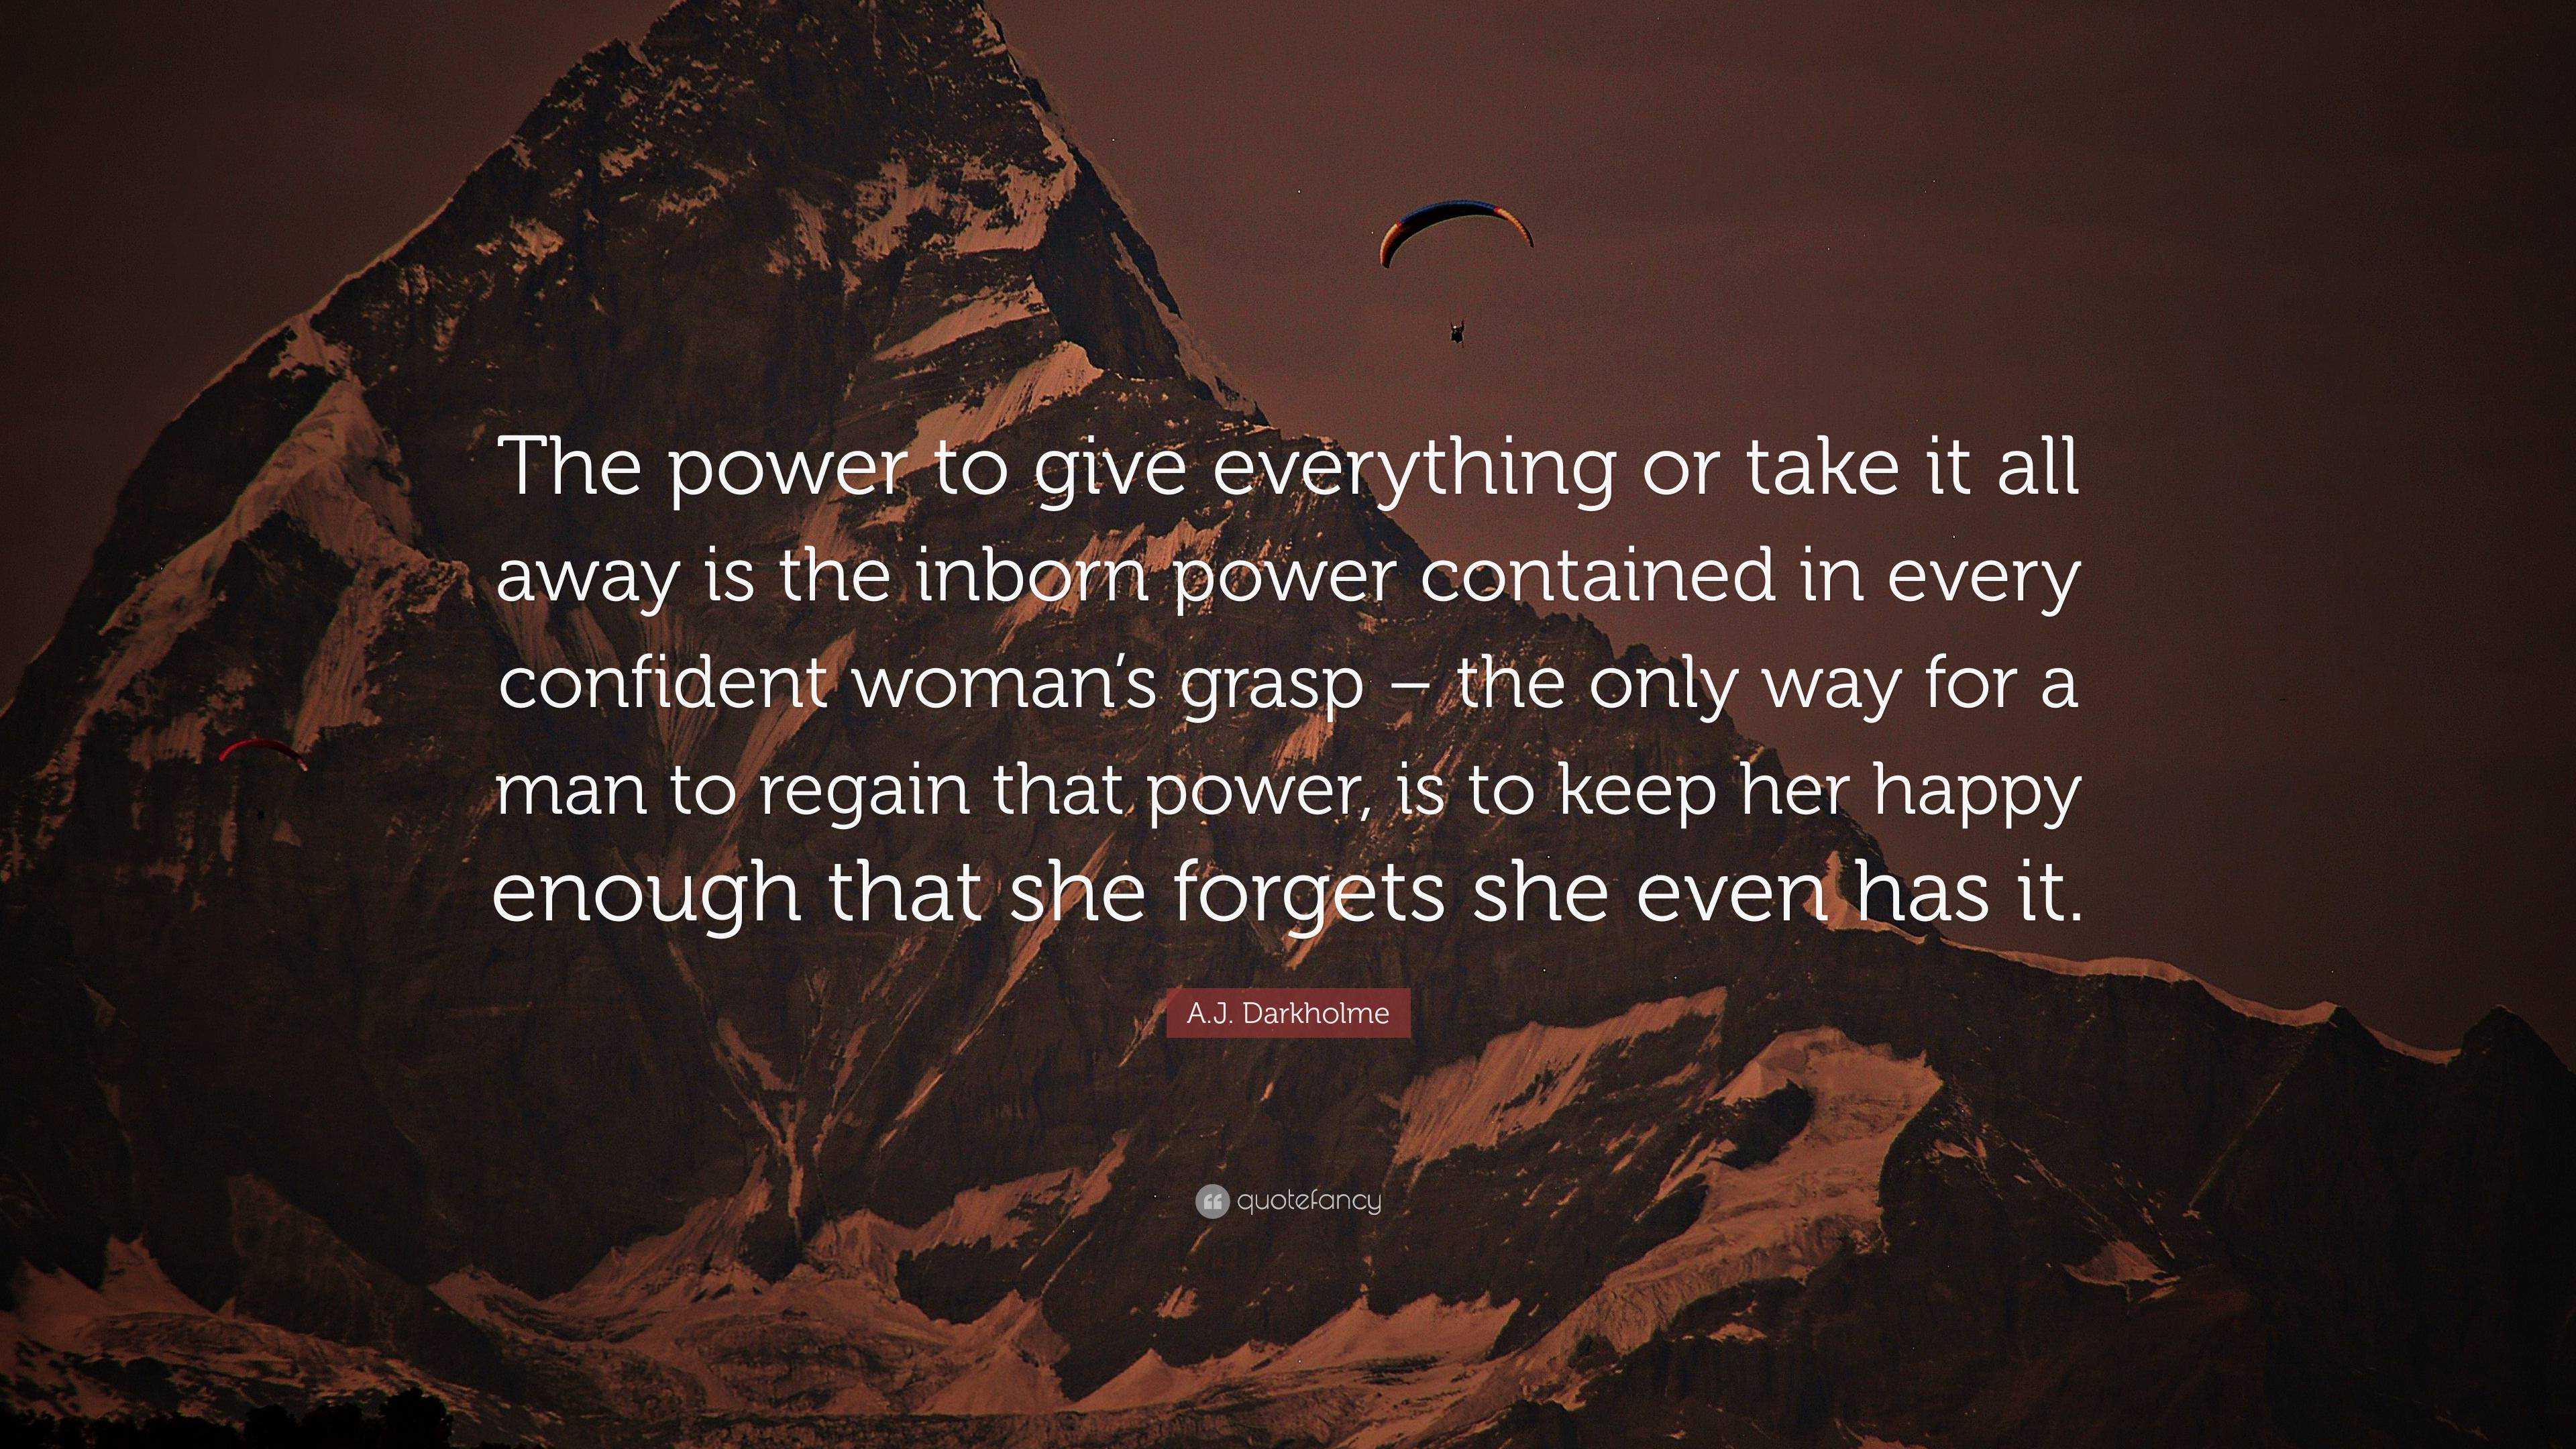 A.J. Darkholme Quote: “The power to give everything or take it all away ...